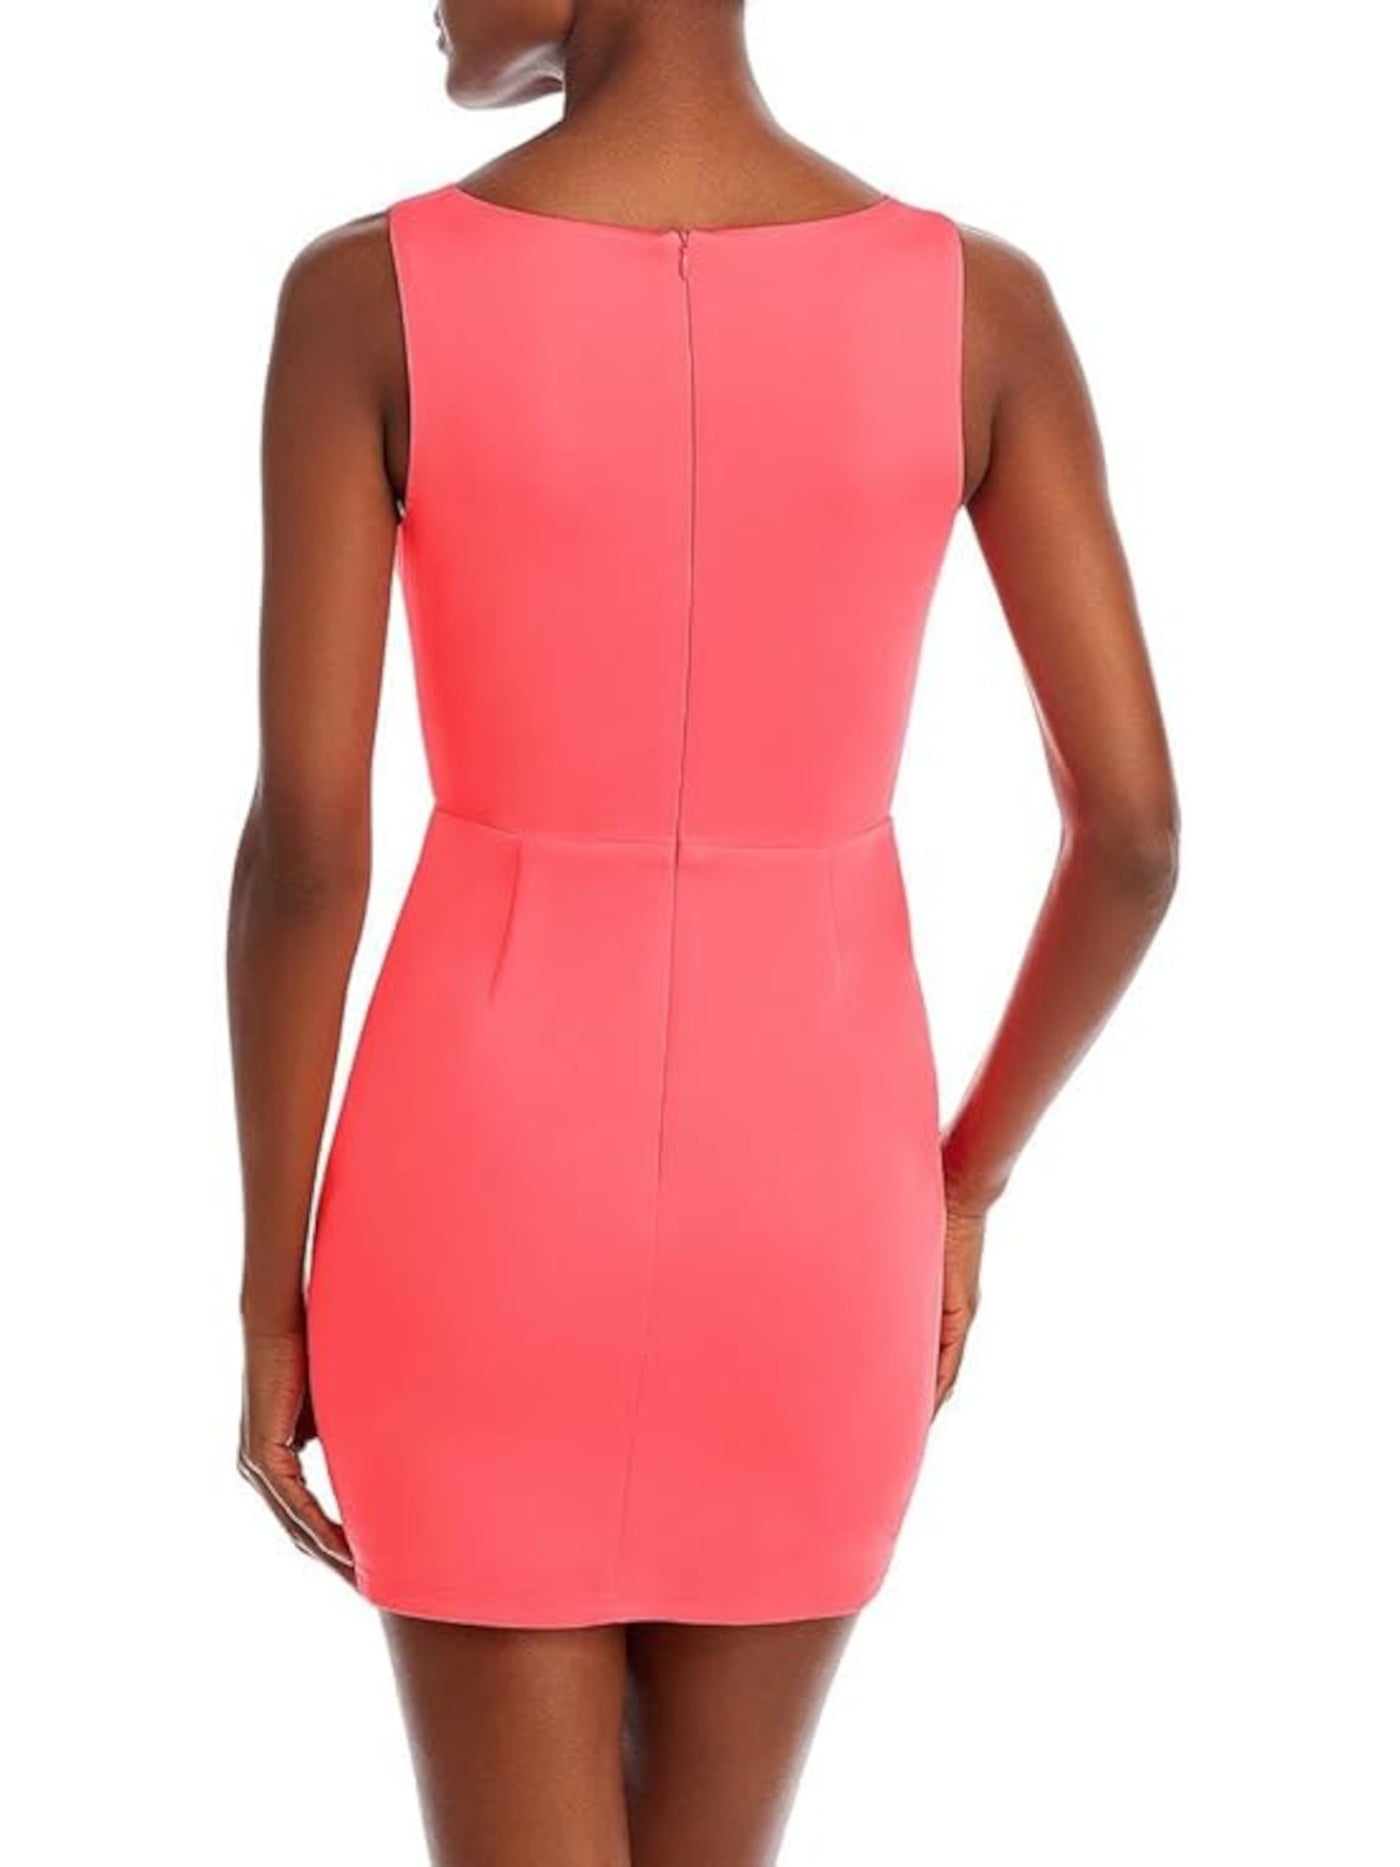 FORE Womens Pink Zippered Lined Knot Detail Corset Style Bodice Sleeveless Sweetheart Neckline Mini Party Body Con Dress S